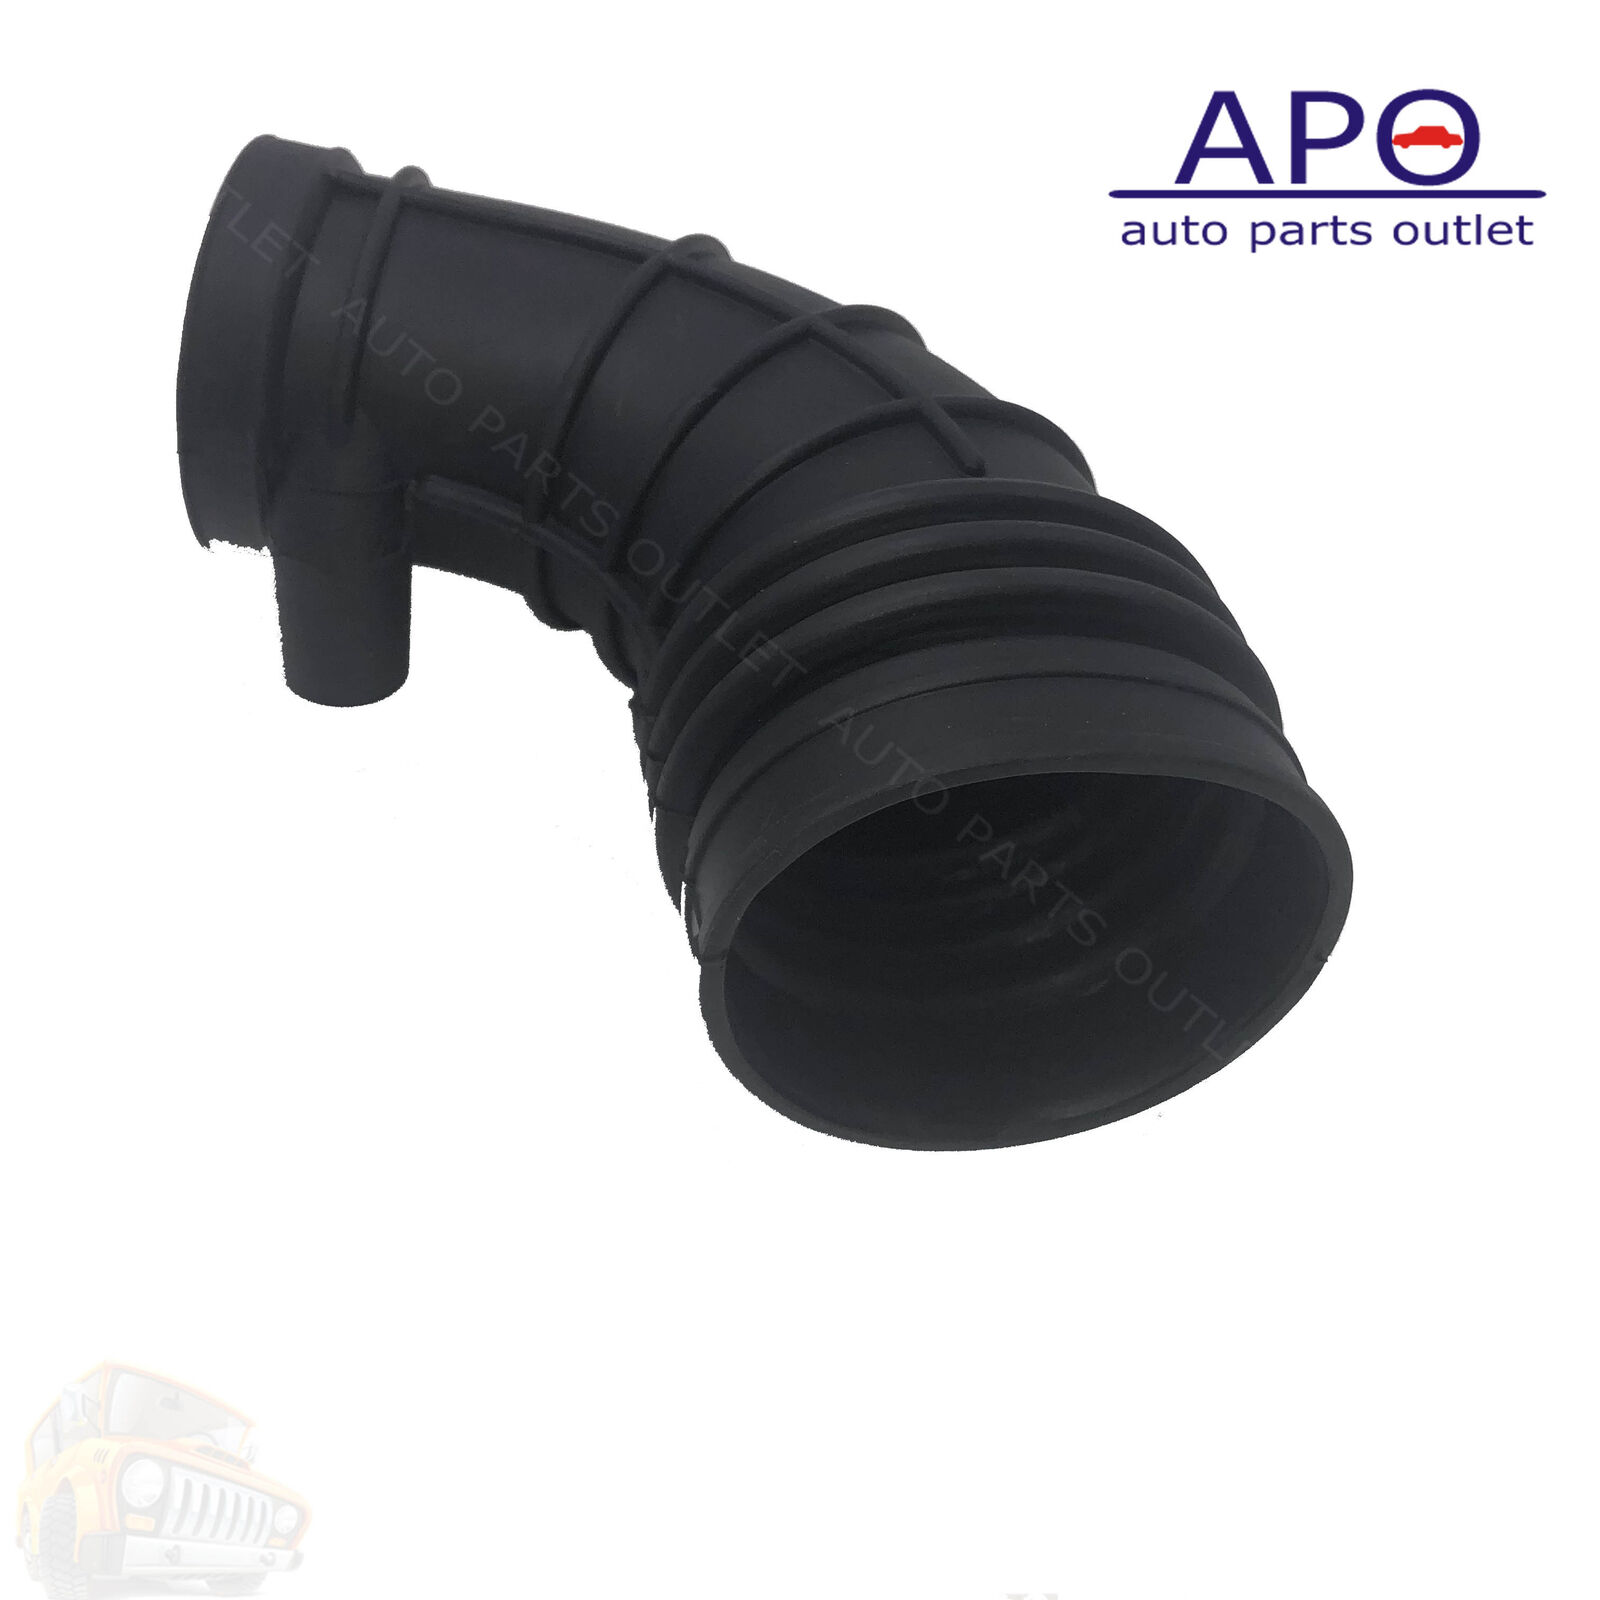 Air Flow Meter Boot Intake Hose 696-805 For 1991-1995 BMW E34 525i 525iT  